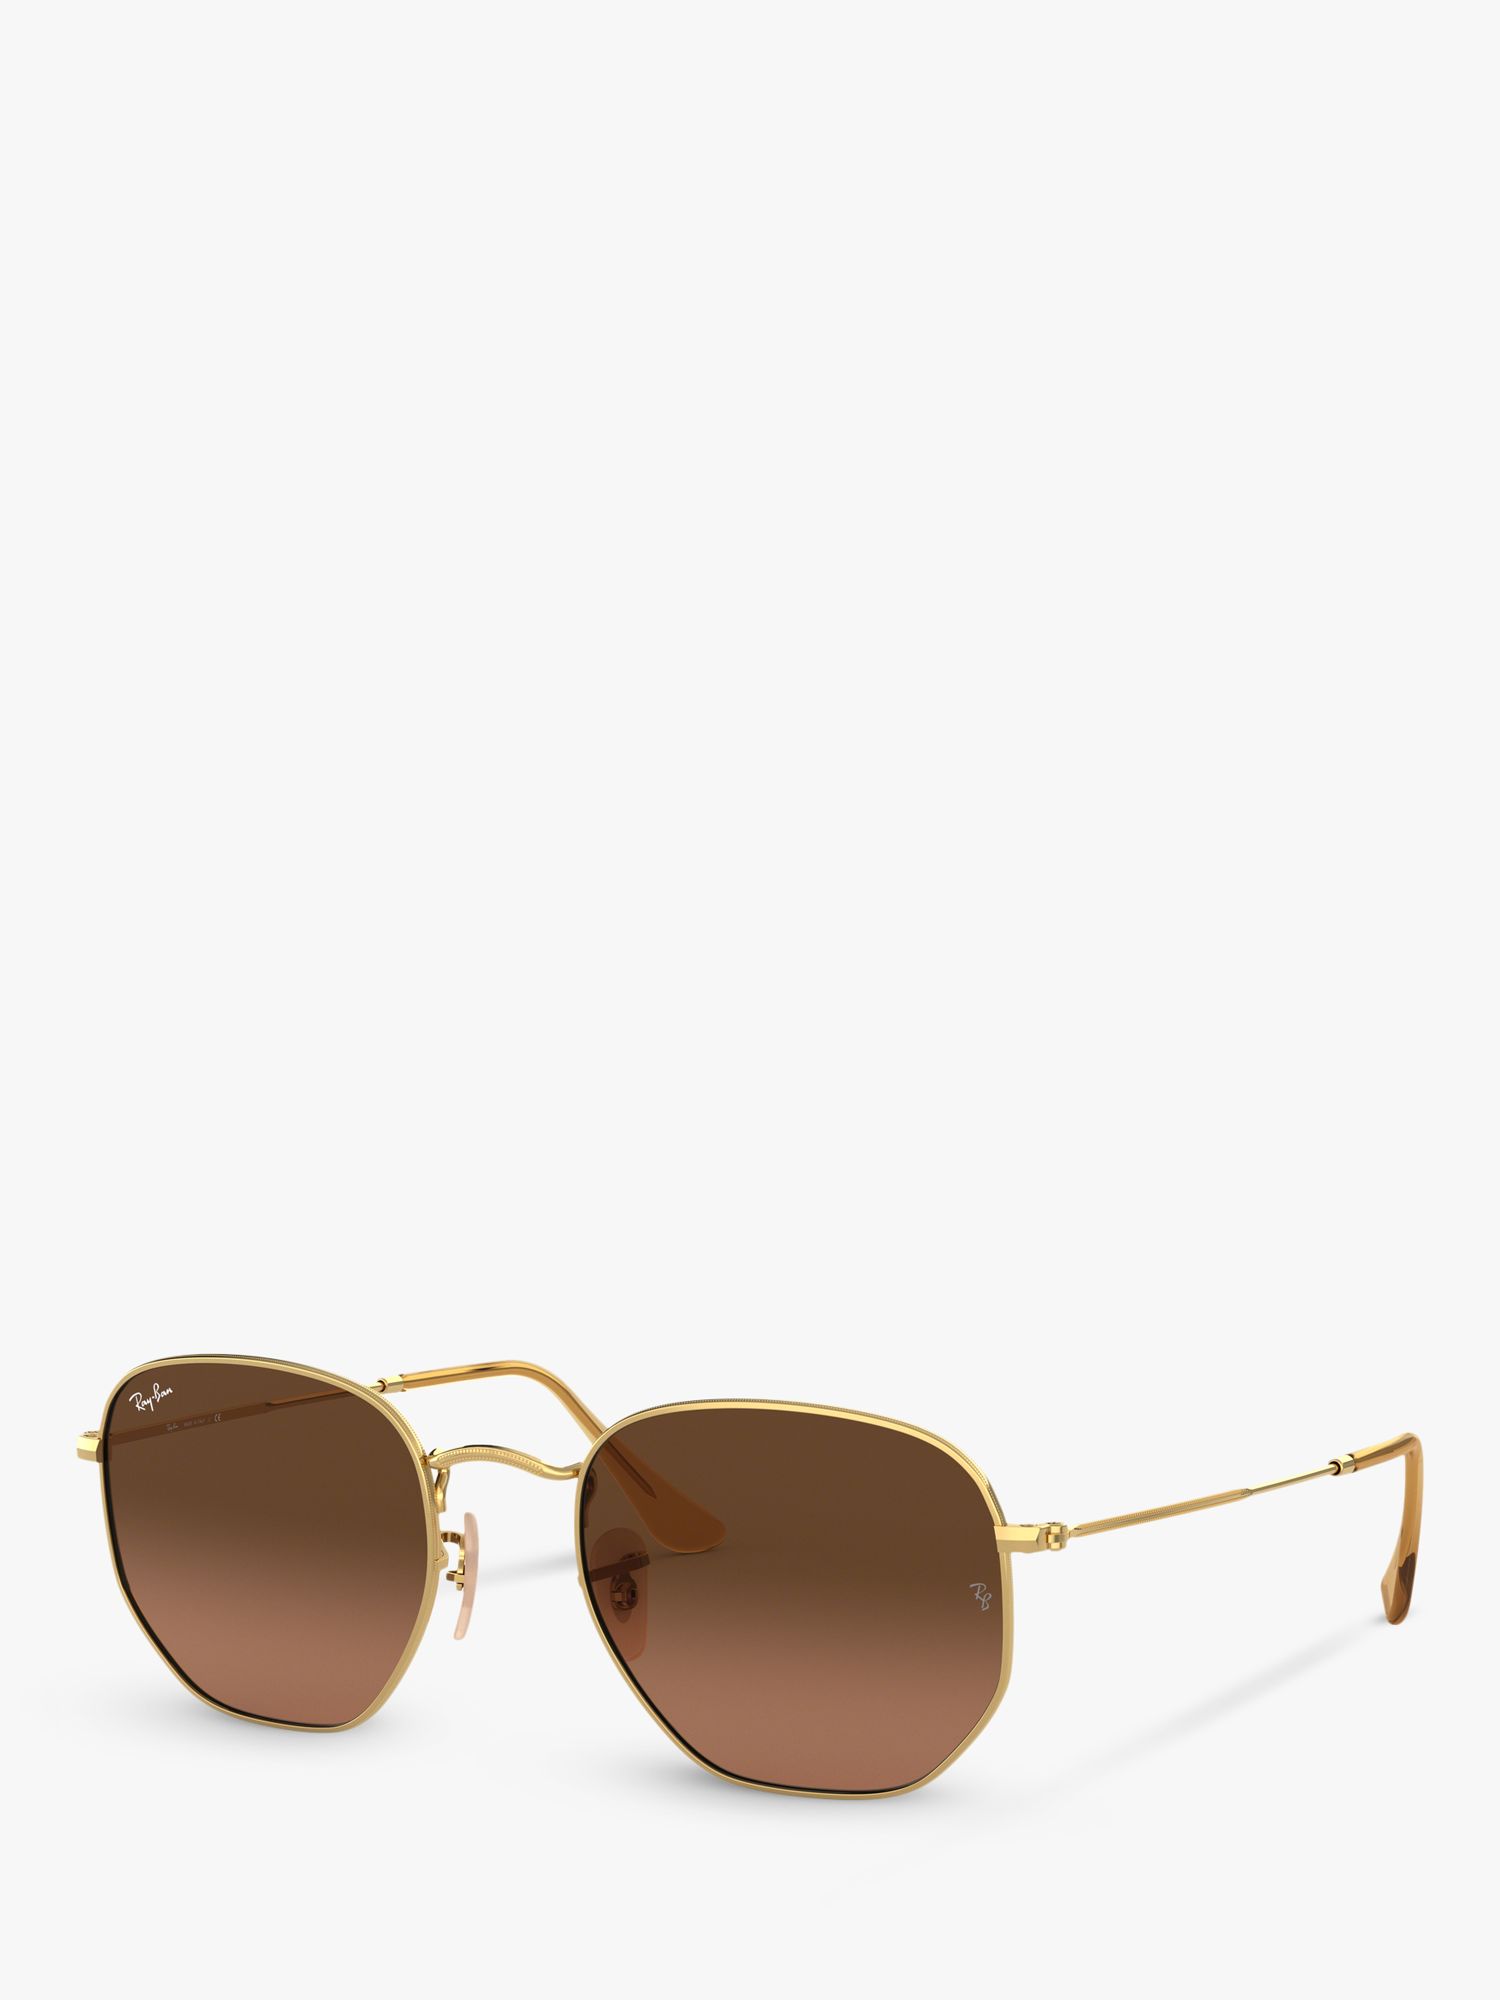 Ray-Ban RB3548N Unisex Hexagonal Sunglasses, Gold/Brown Gradient at ...